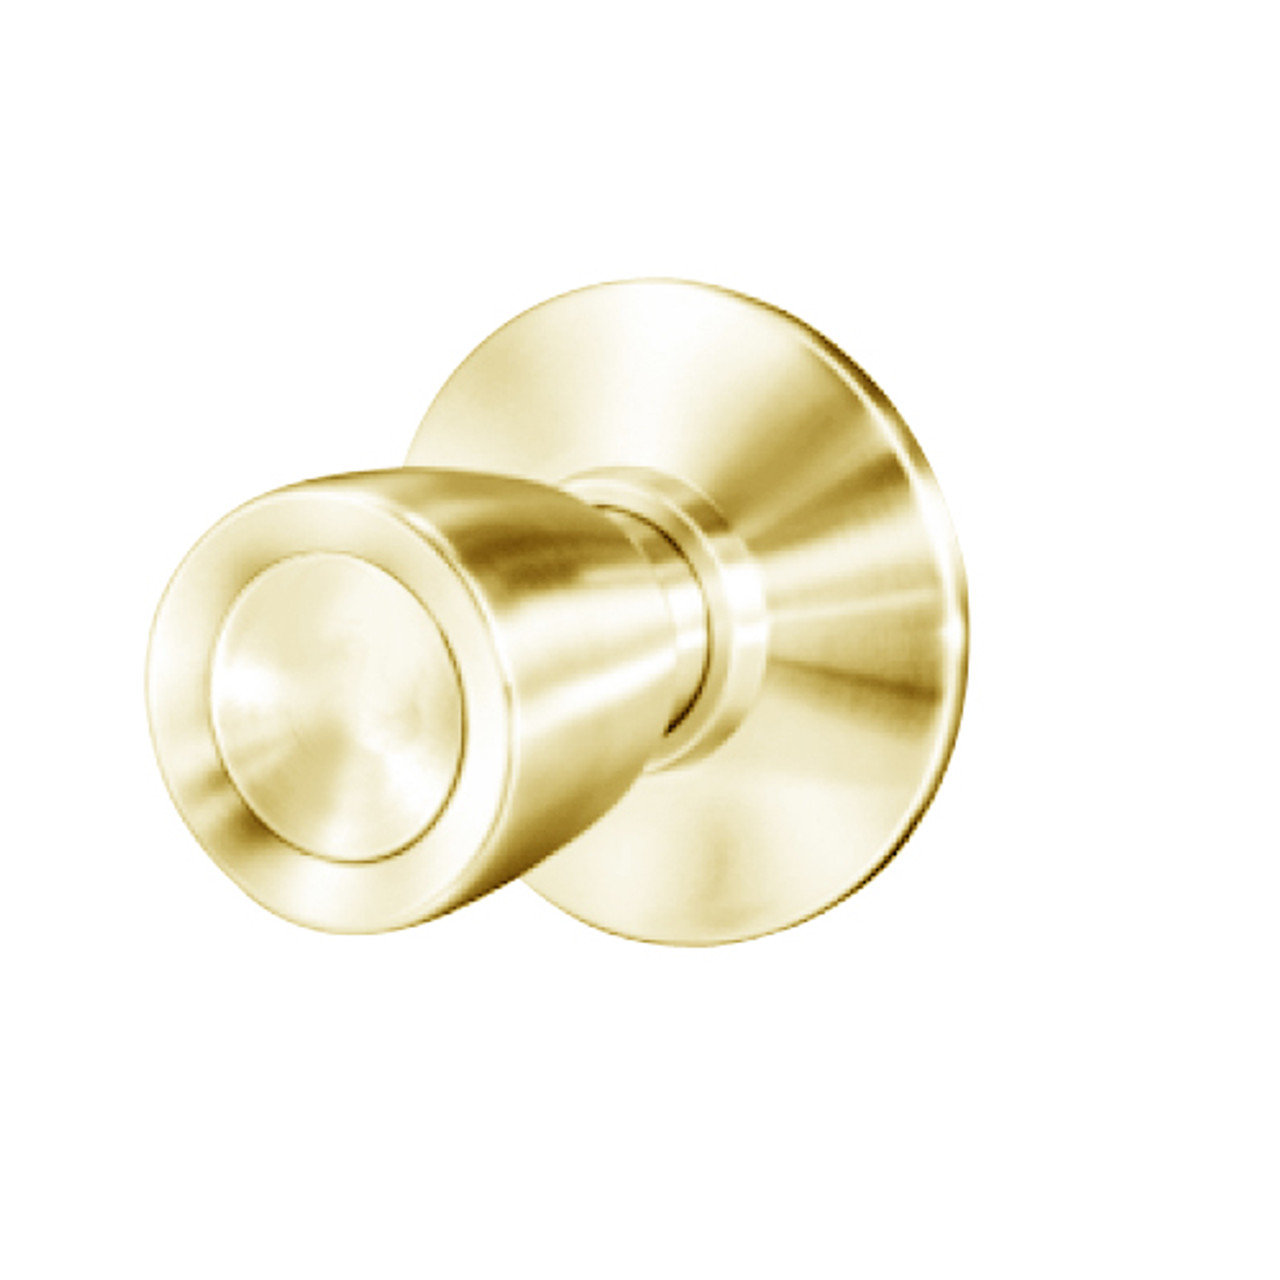 8K30Q6DS3605 Best 8K Series Exit Heavy Duty Cylindrical Knob Locks with Tulip Style in Bright Brass